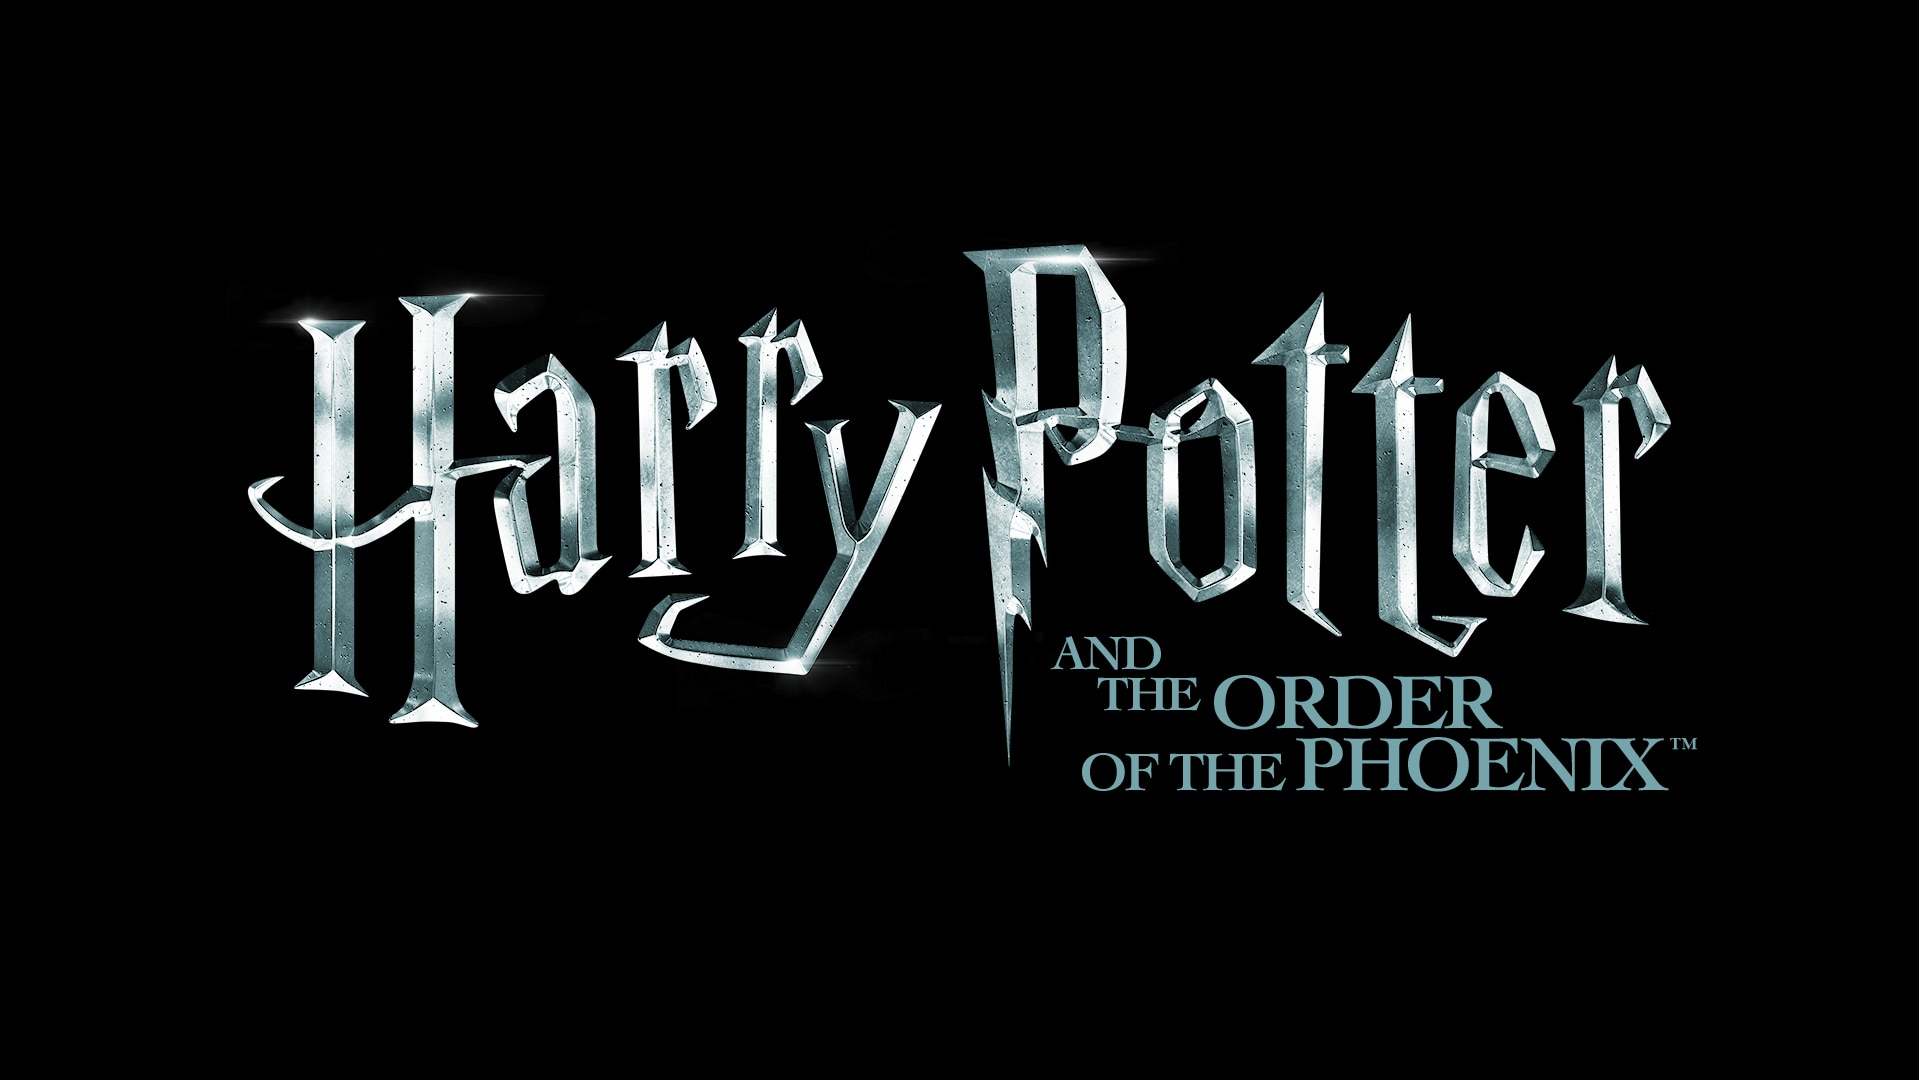 harry potter and the order of the phoenix watch online free 123movies